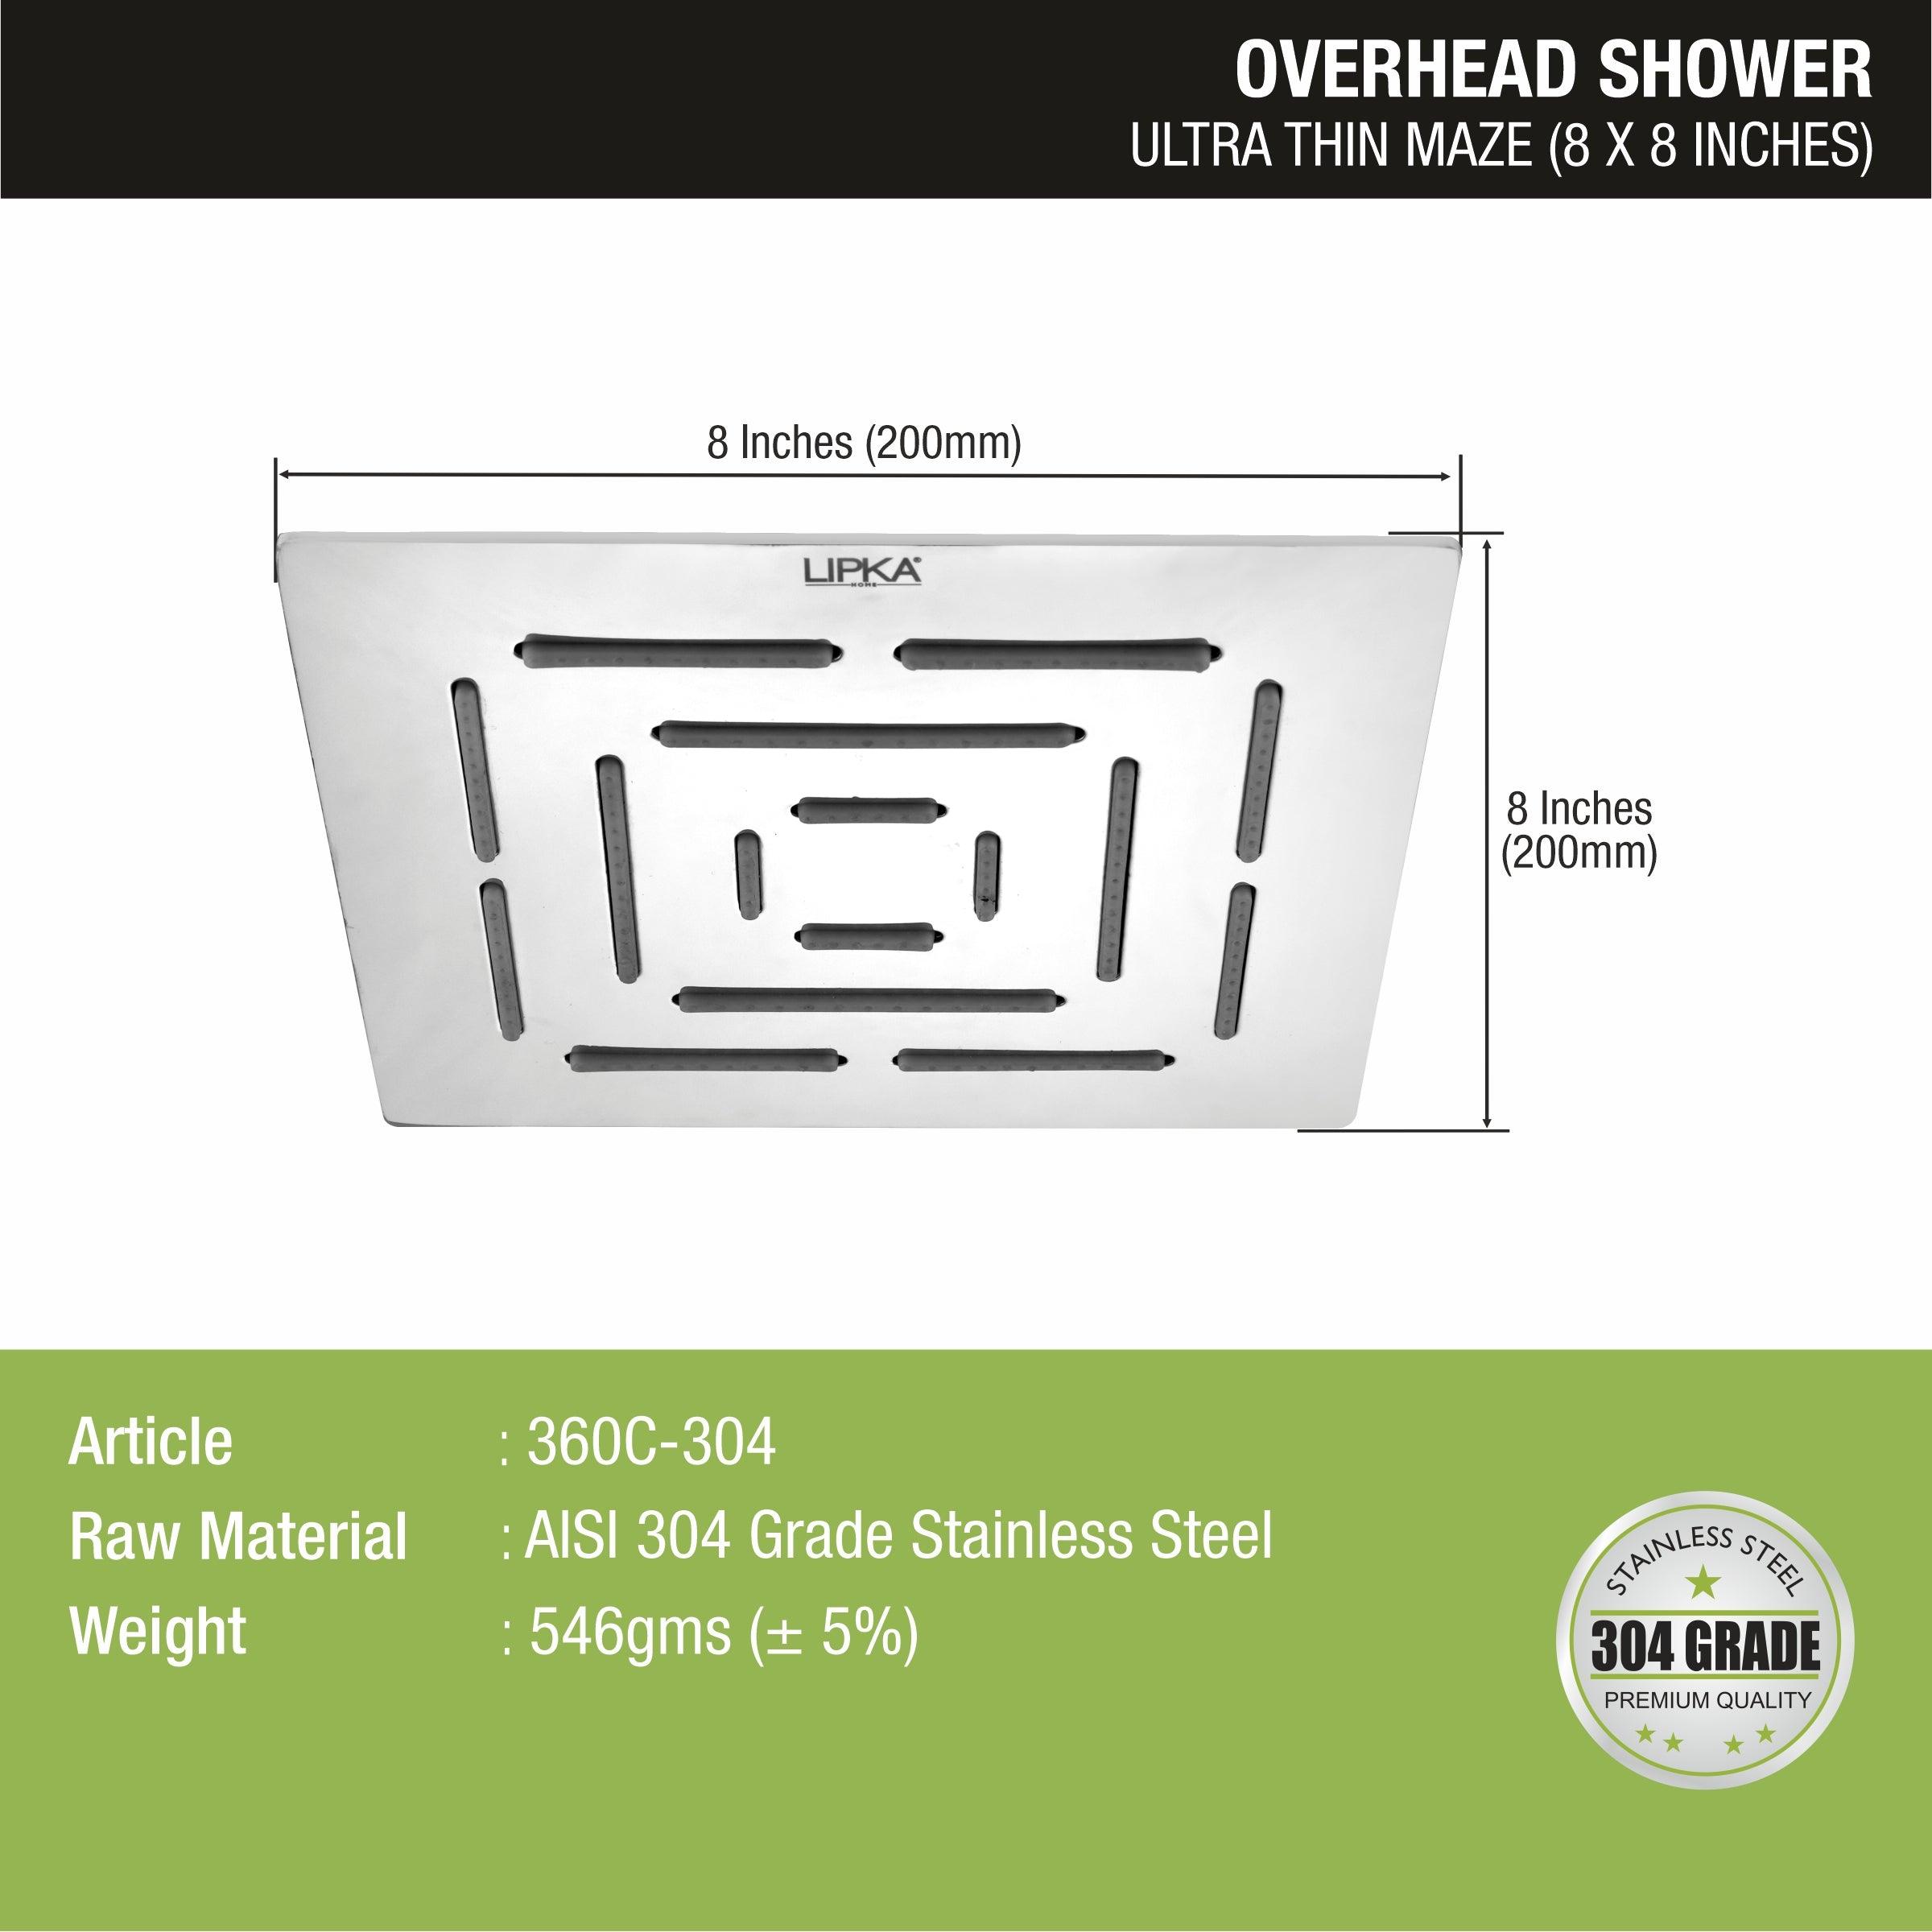 Ultra Thin Maze 304-Grade Overhead Rain Shower (8 x 8 Inches) sizes and dimensions